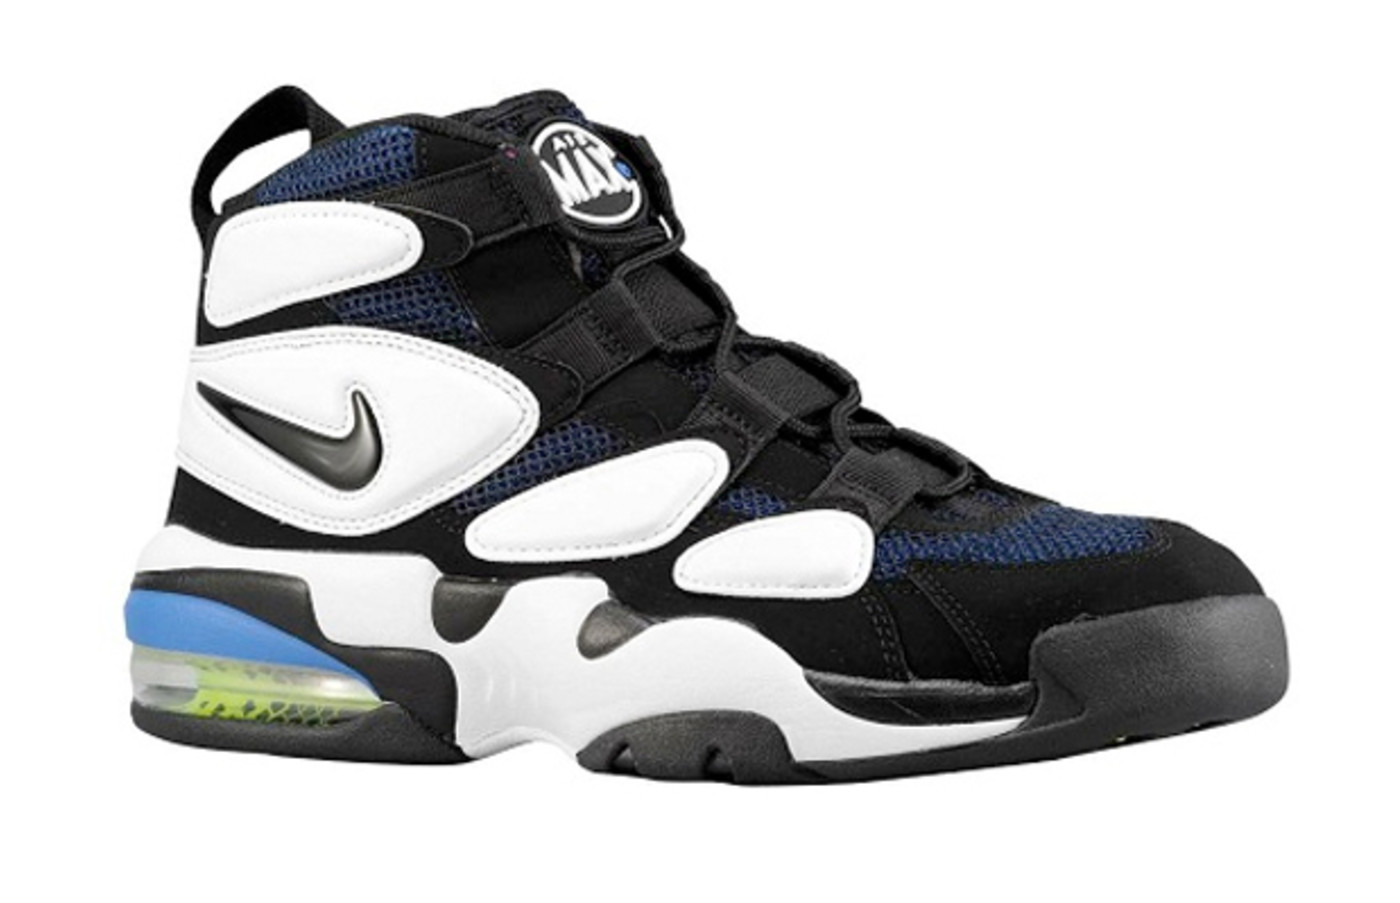 The 25 Best Nike Air Max Sneakers Of 